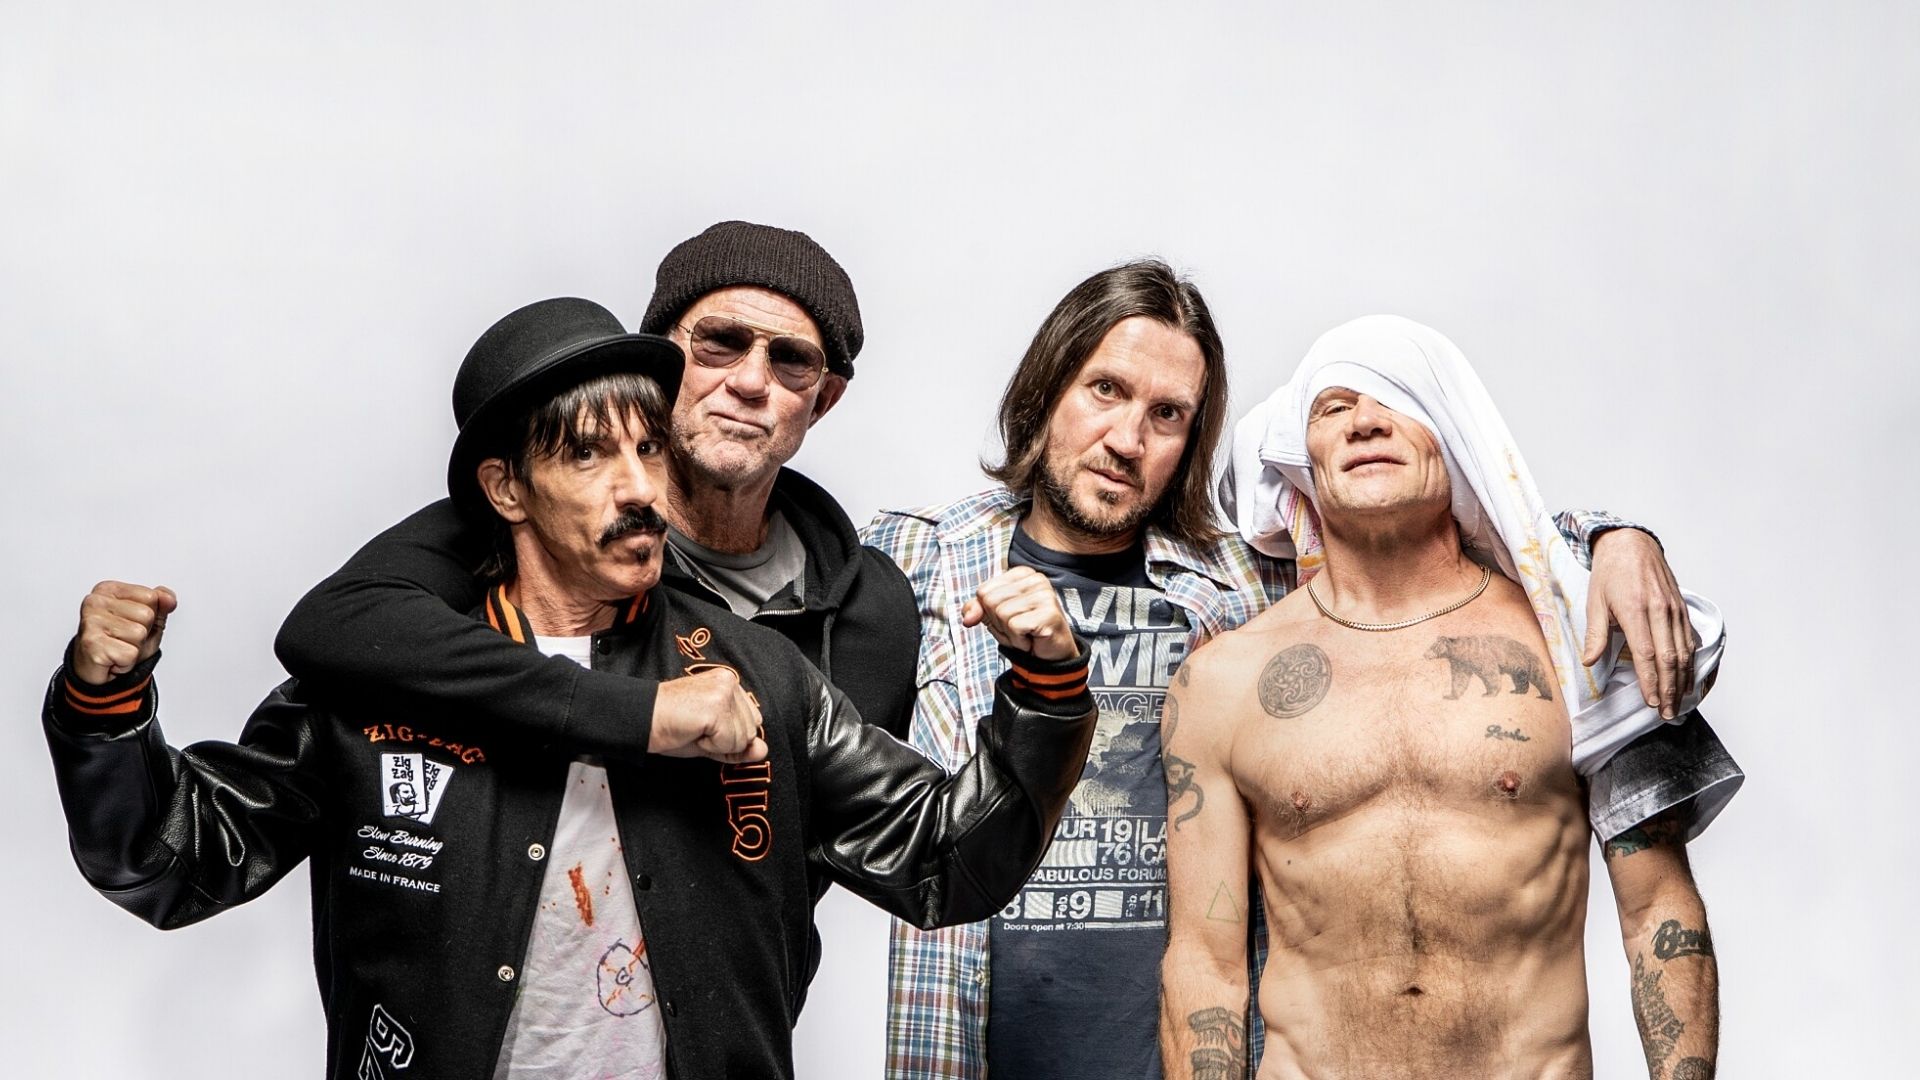 Chase no peppers. Группа Red hot Chili Peppers 2022. Барабанщик RHCP. Red hot Chili Peppers сейчас. Состав ред хот Чили Пепперс.